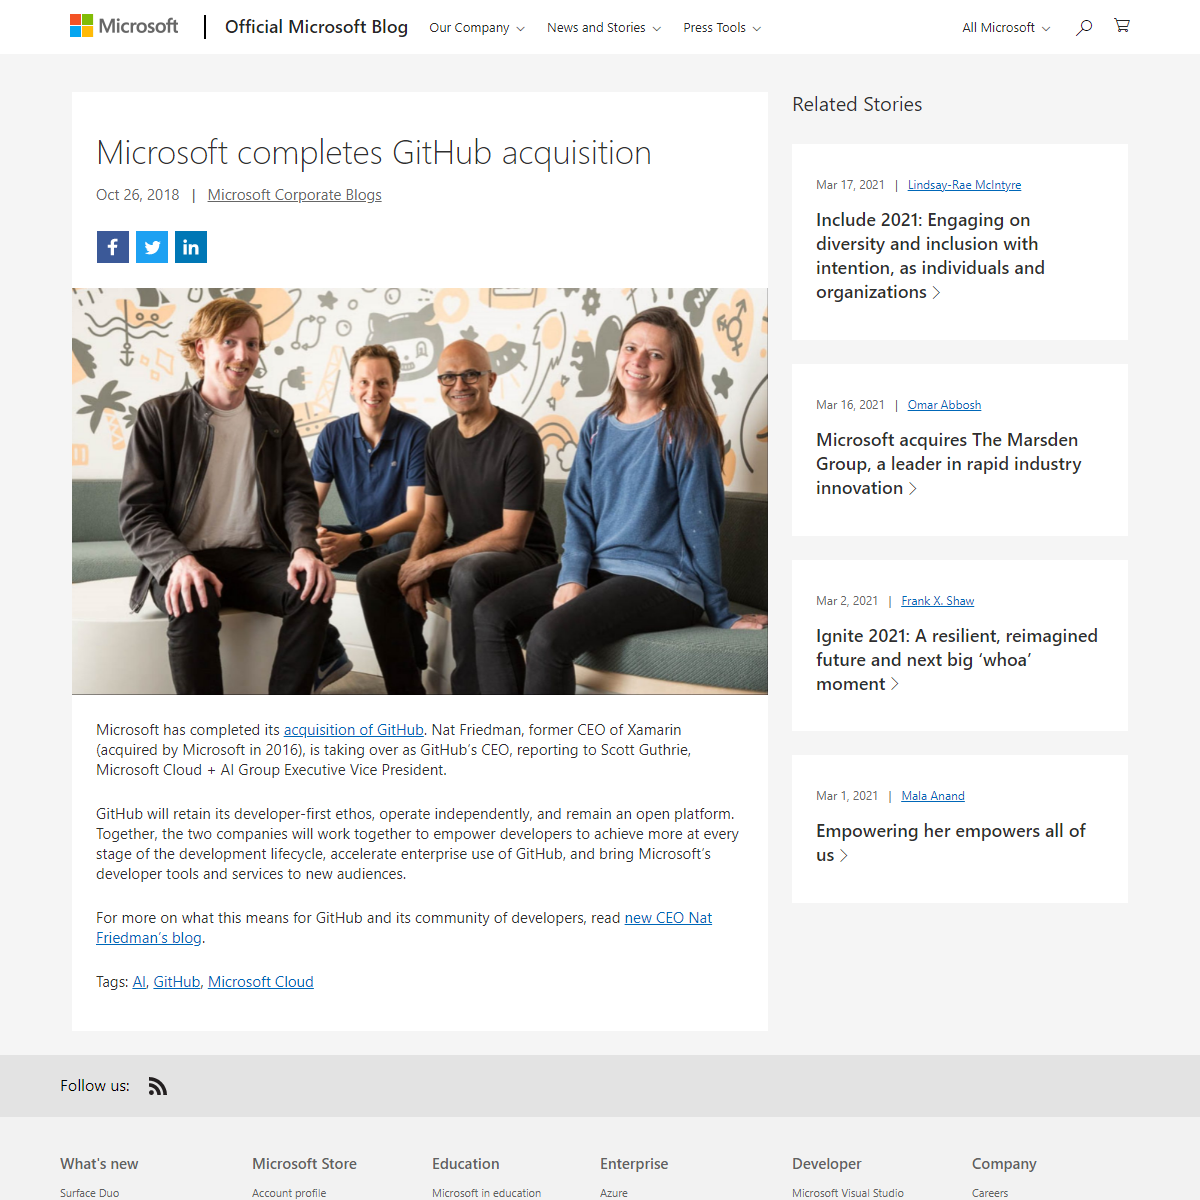 Microsoft completes GitHub acquisition - The Official Microsoft Blog